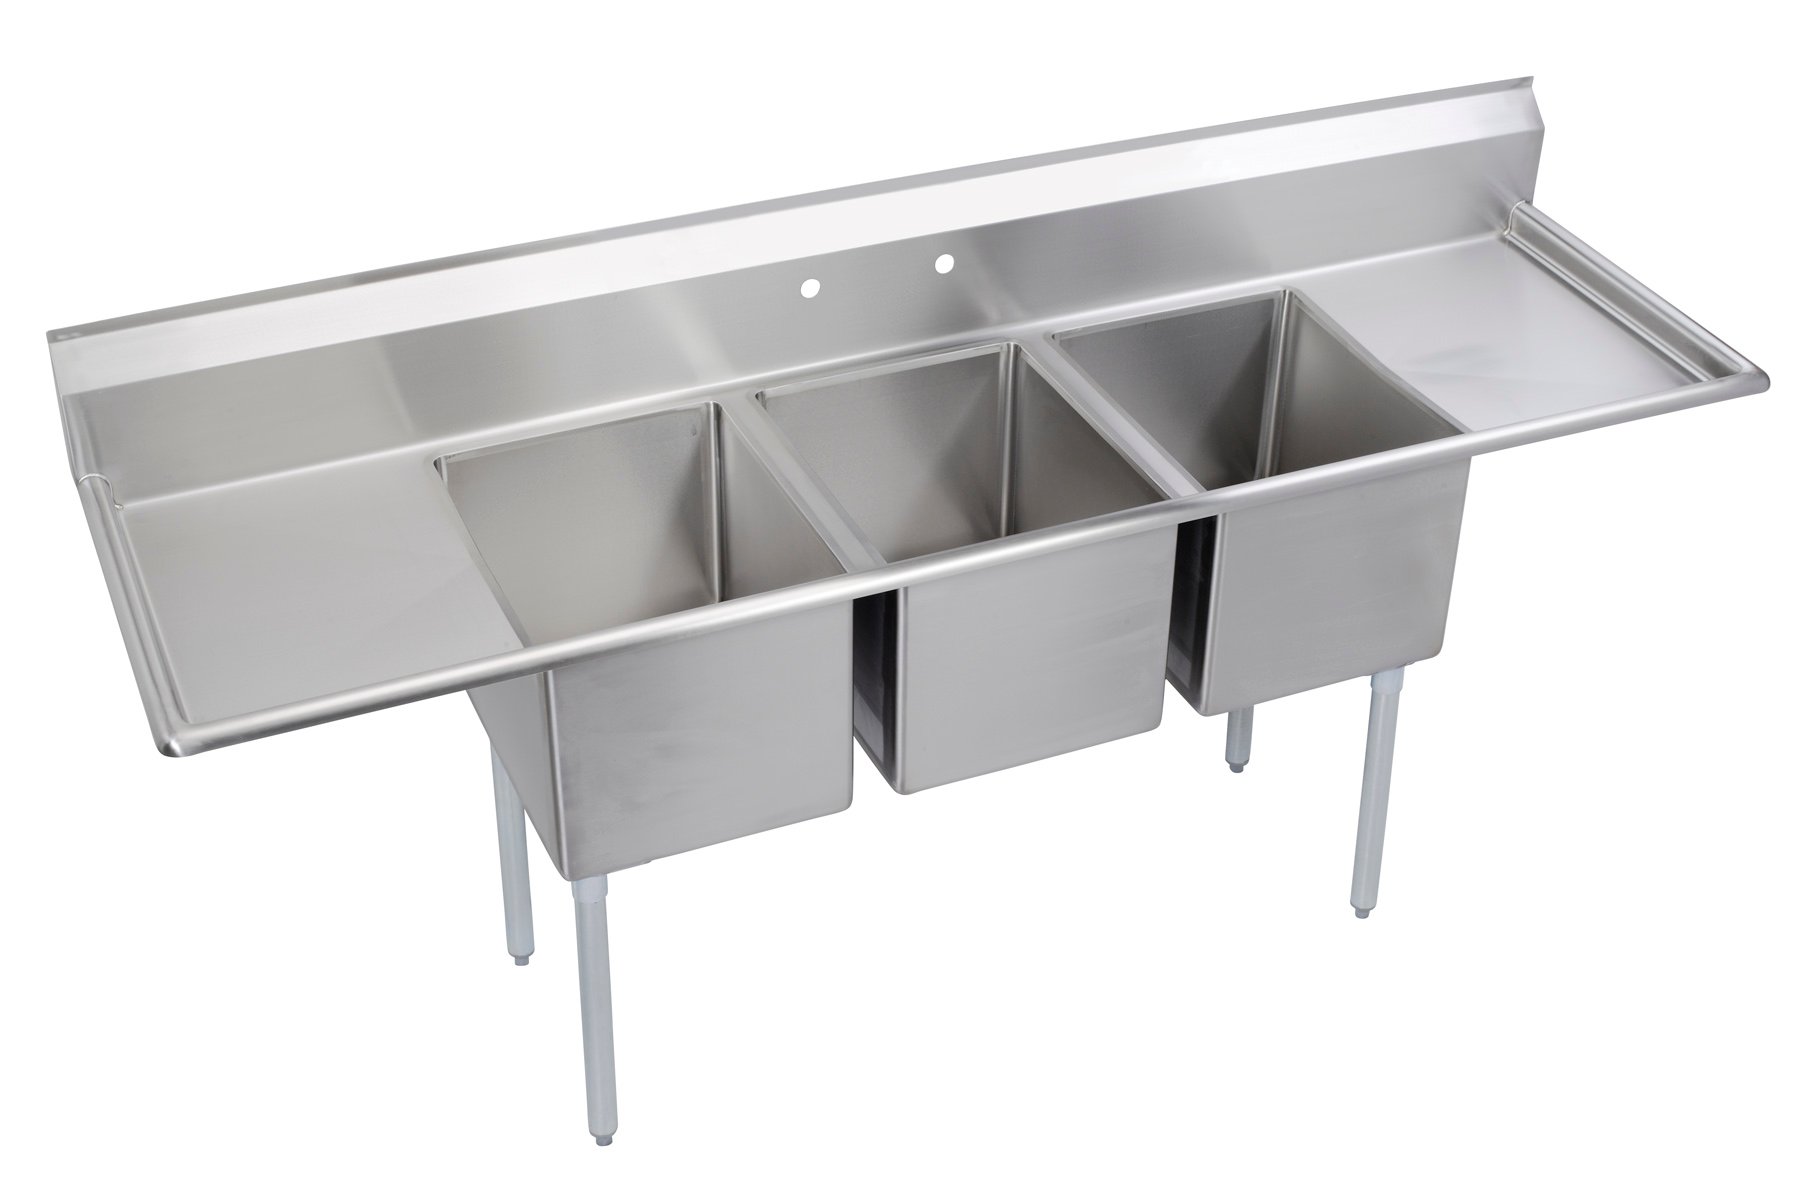 3 compartment home kitchen sink